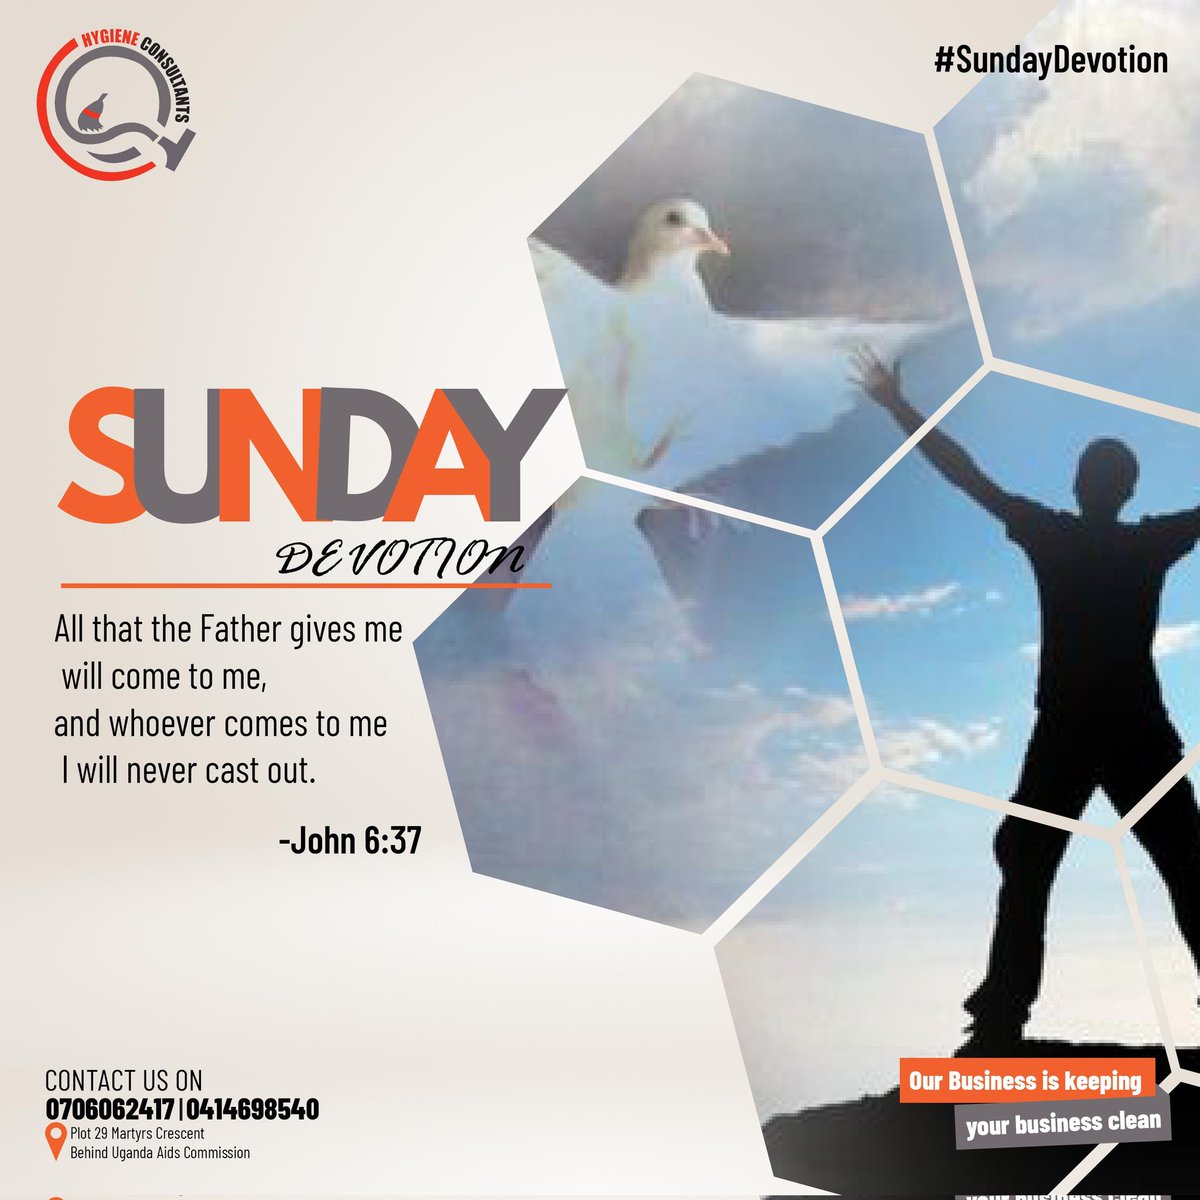 To all our esteemed  customers, have a blessed Sunday.
#SundayDevotion